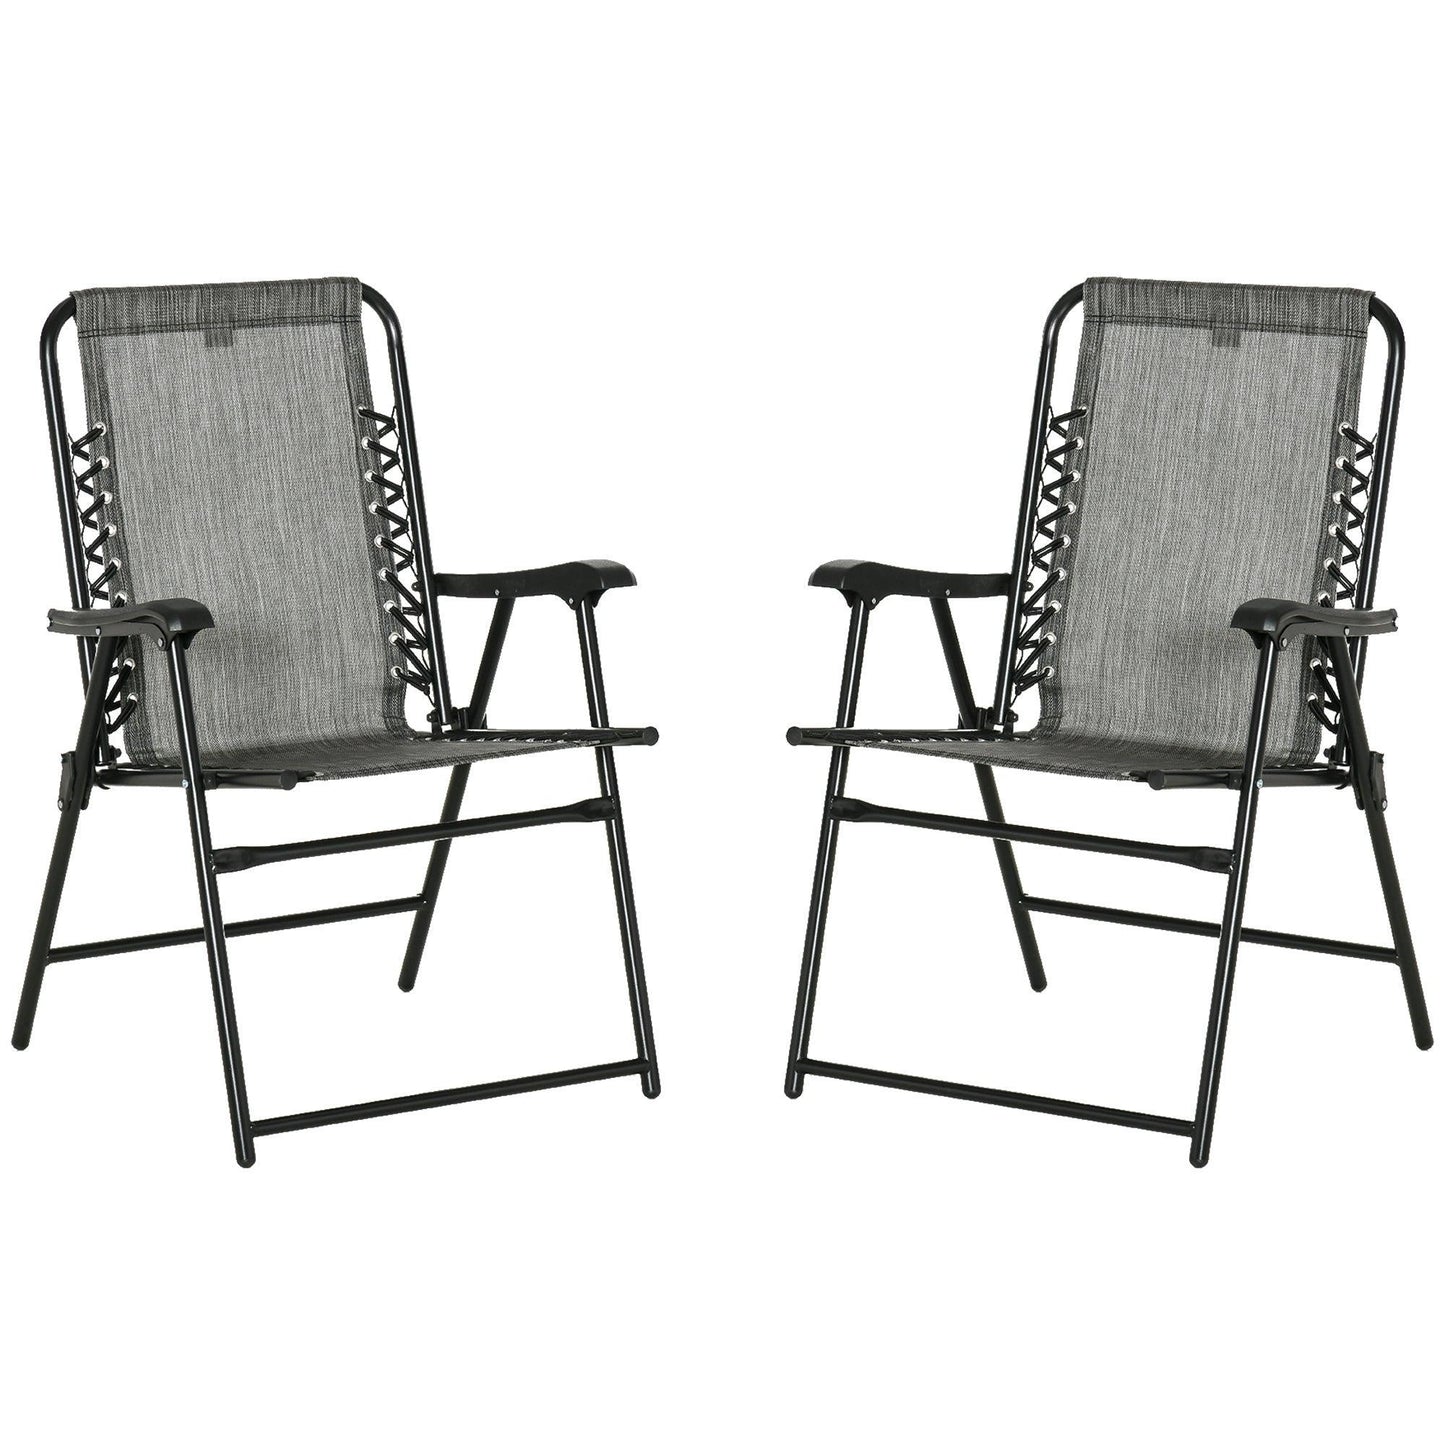 Outsunny Folding Chair Set: Outdoor Loungers for Camping Pool Beach - ALL4U RETAILER LTD